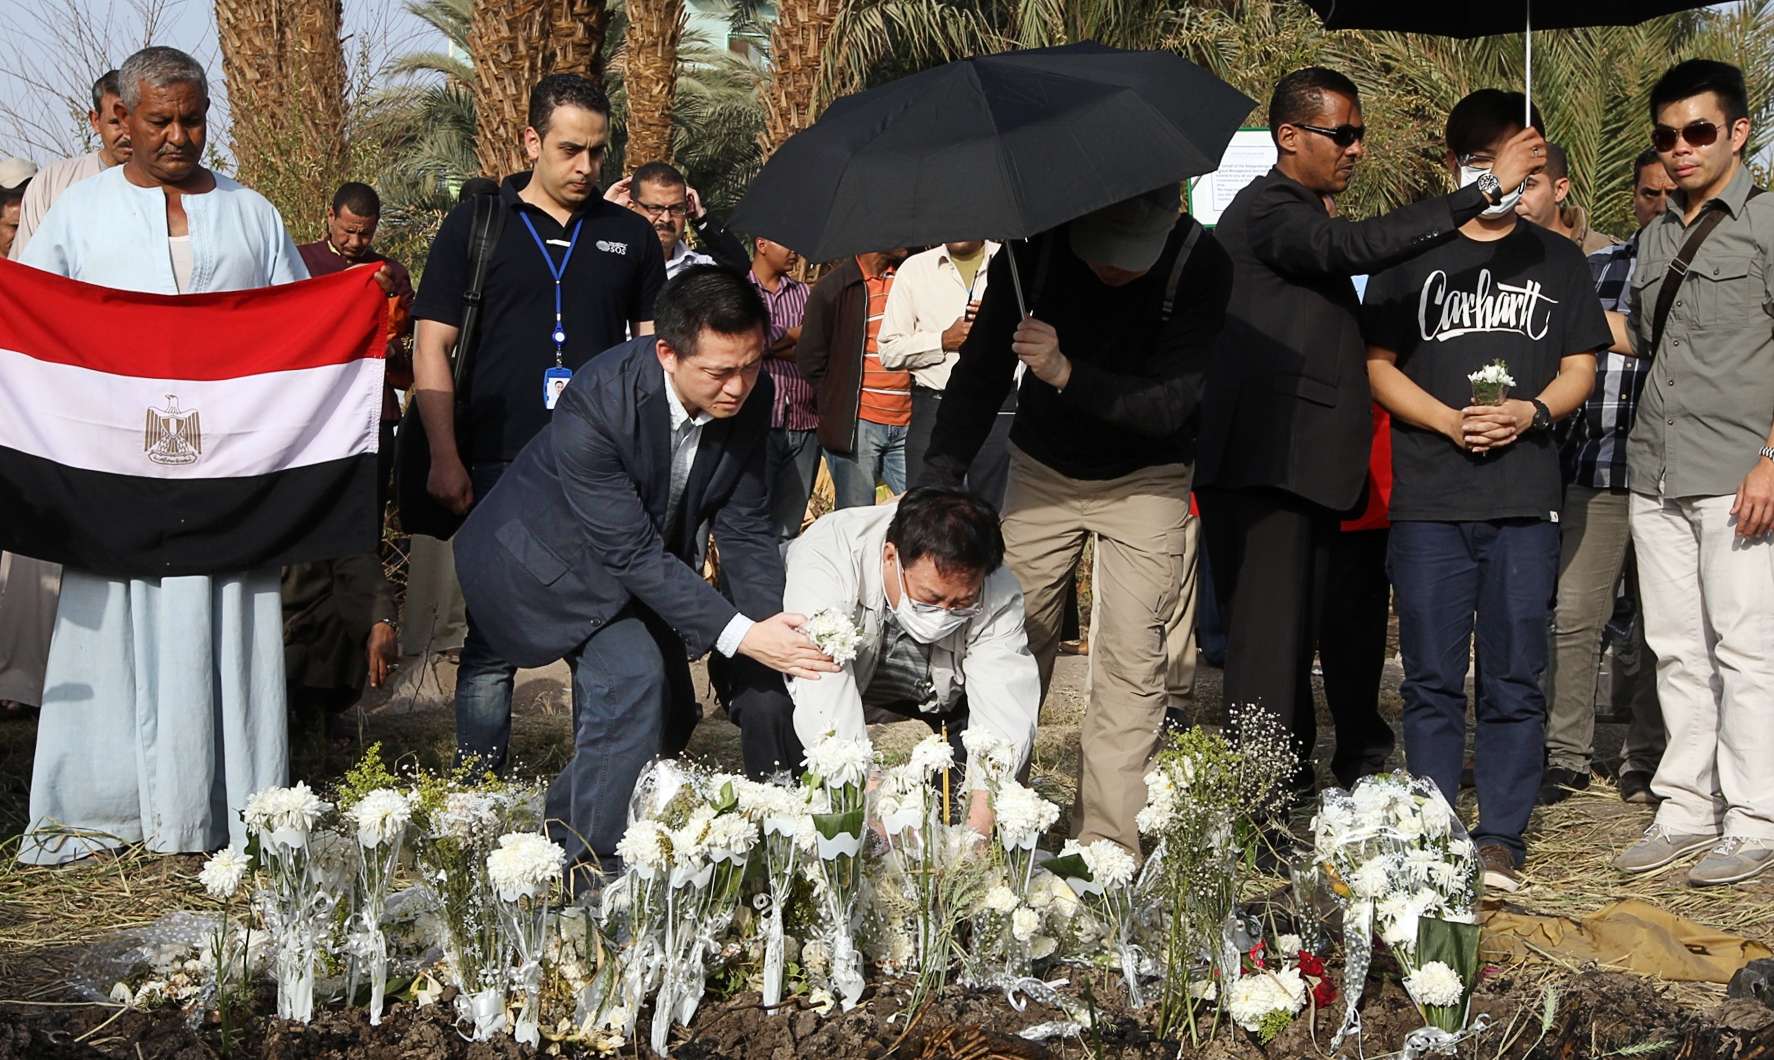 Family members of the victims mourn at the crash site in Egypt. Photo: Sam Tsang